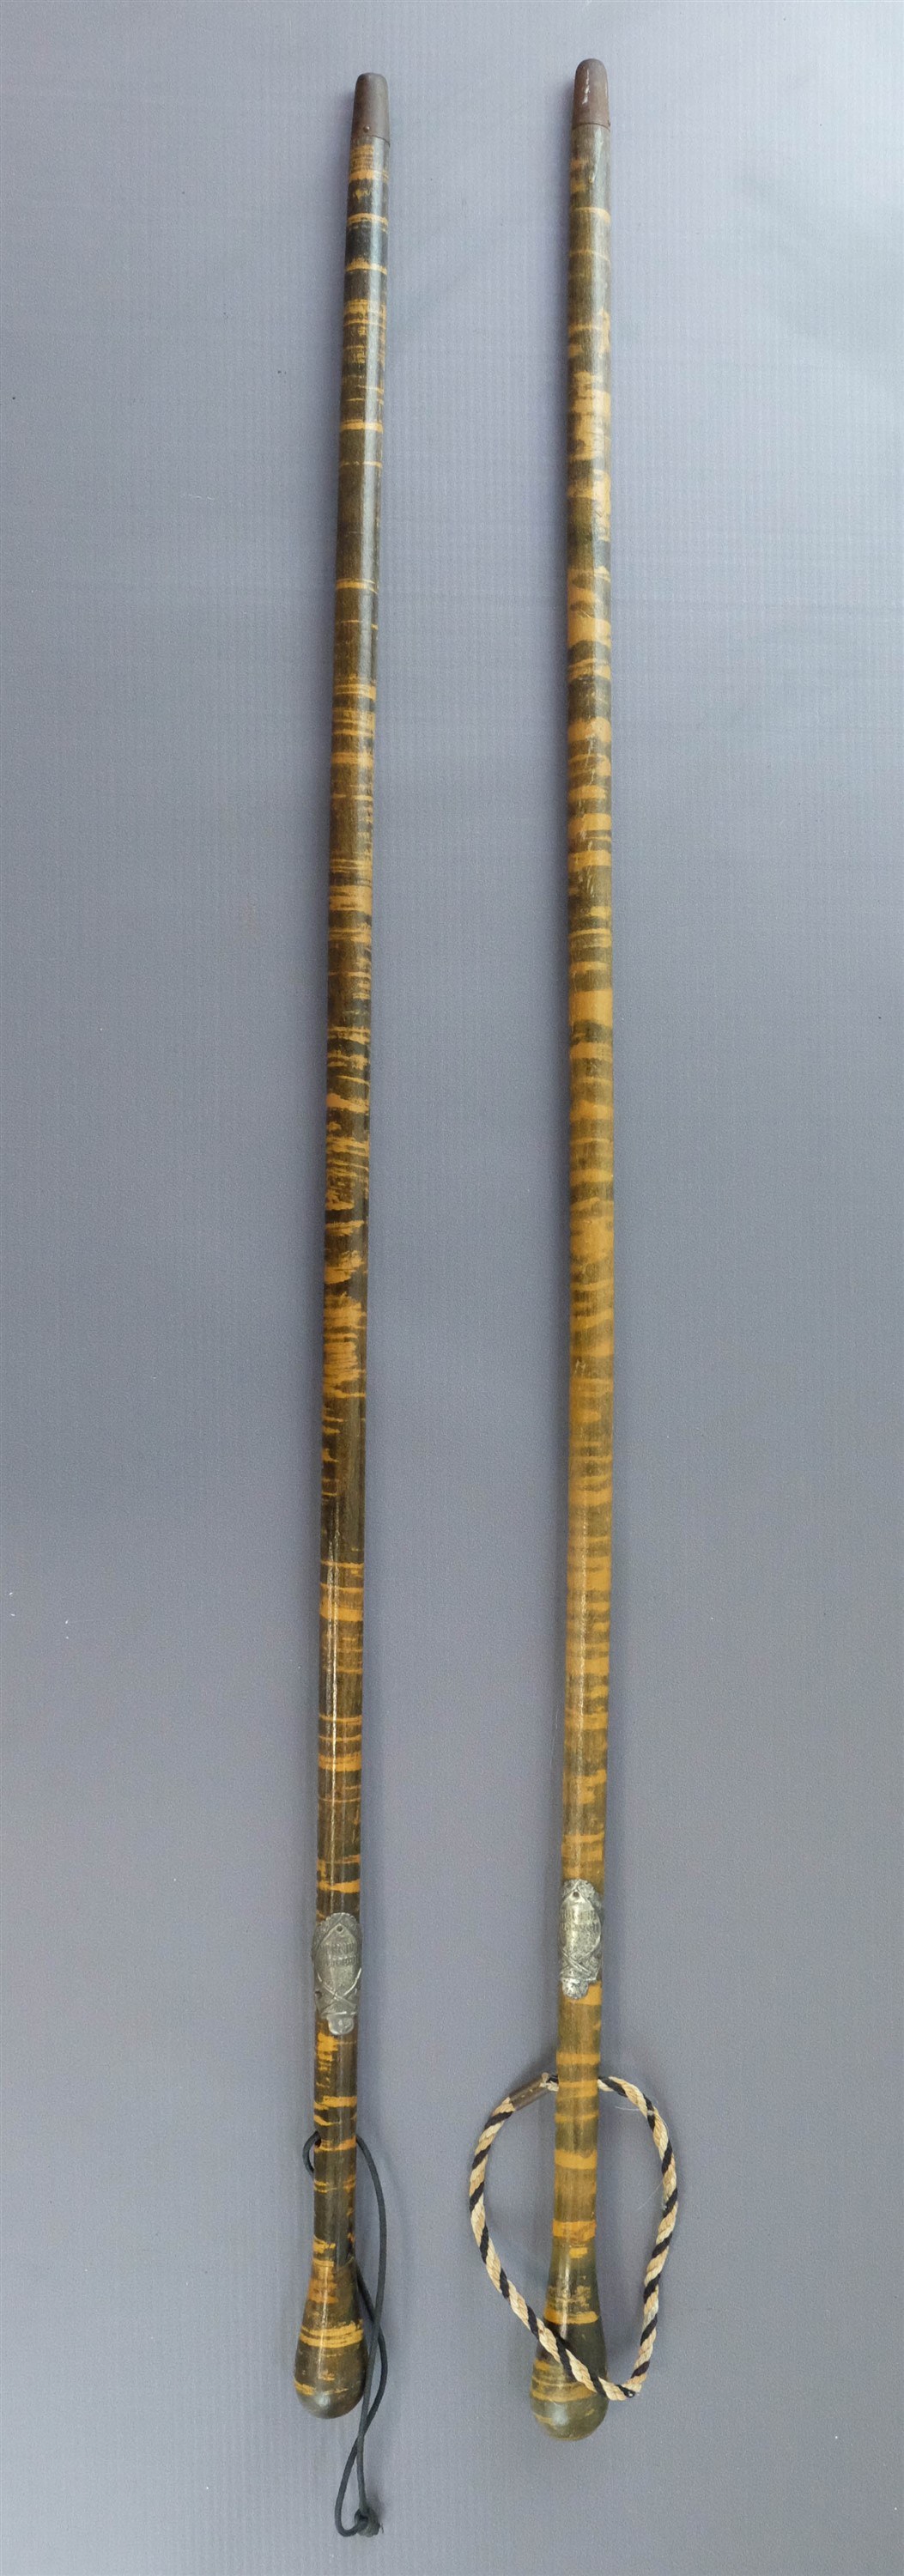 Two inter-War German walking sticks bearing army reservist plaques and one having a lanyard in